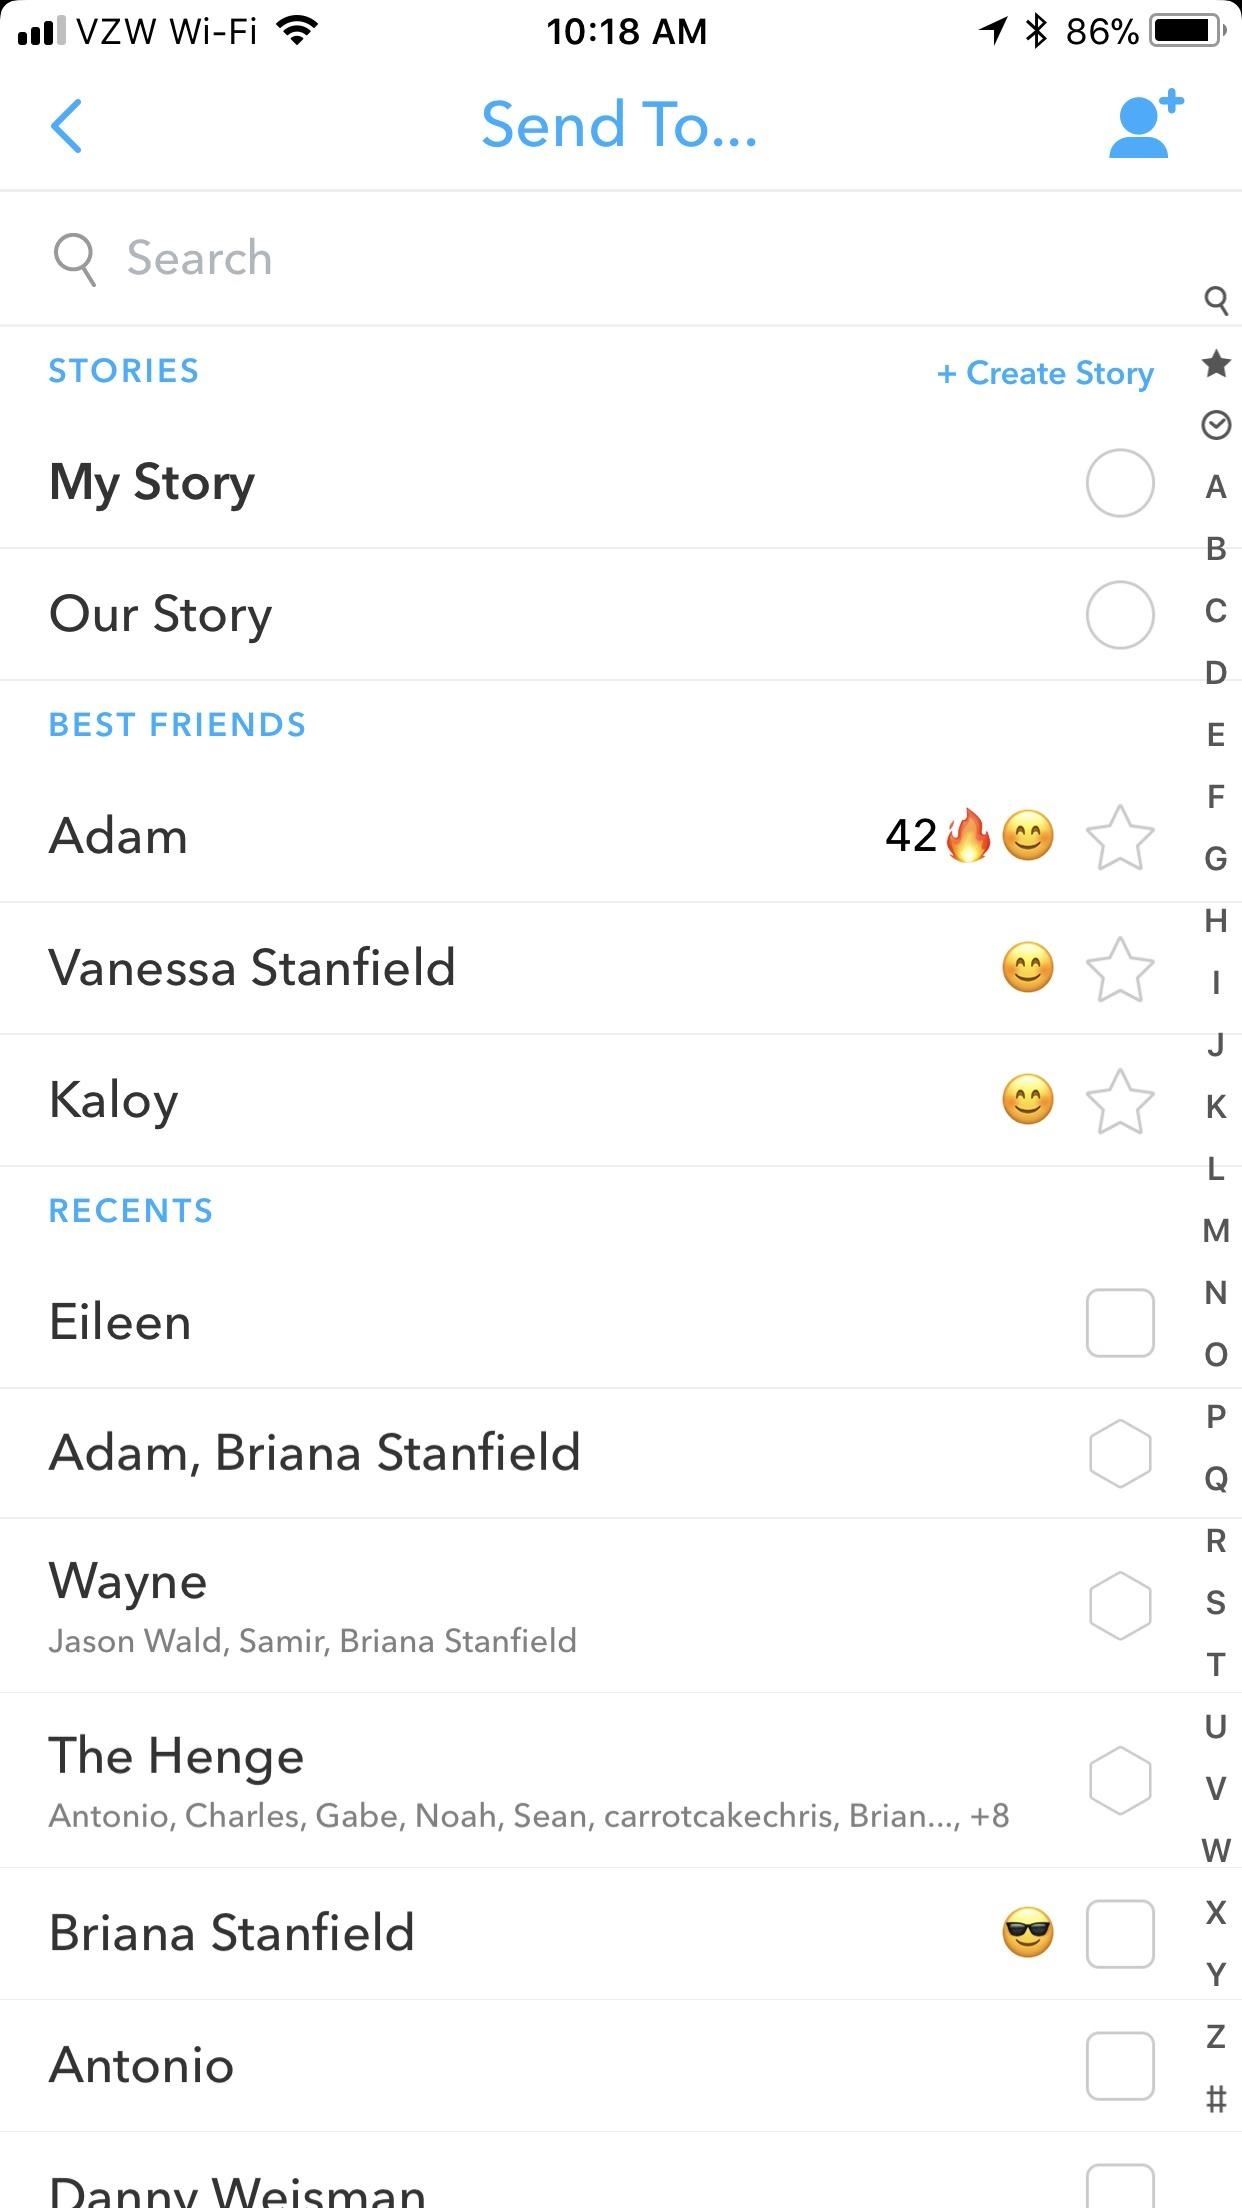 Personalize Your Snapchat Stories with Drawings, Emoji, GIFs & More